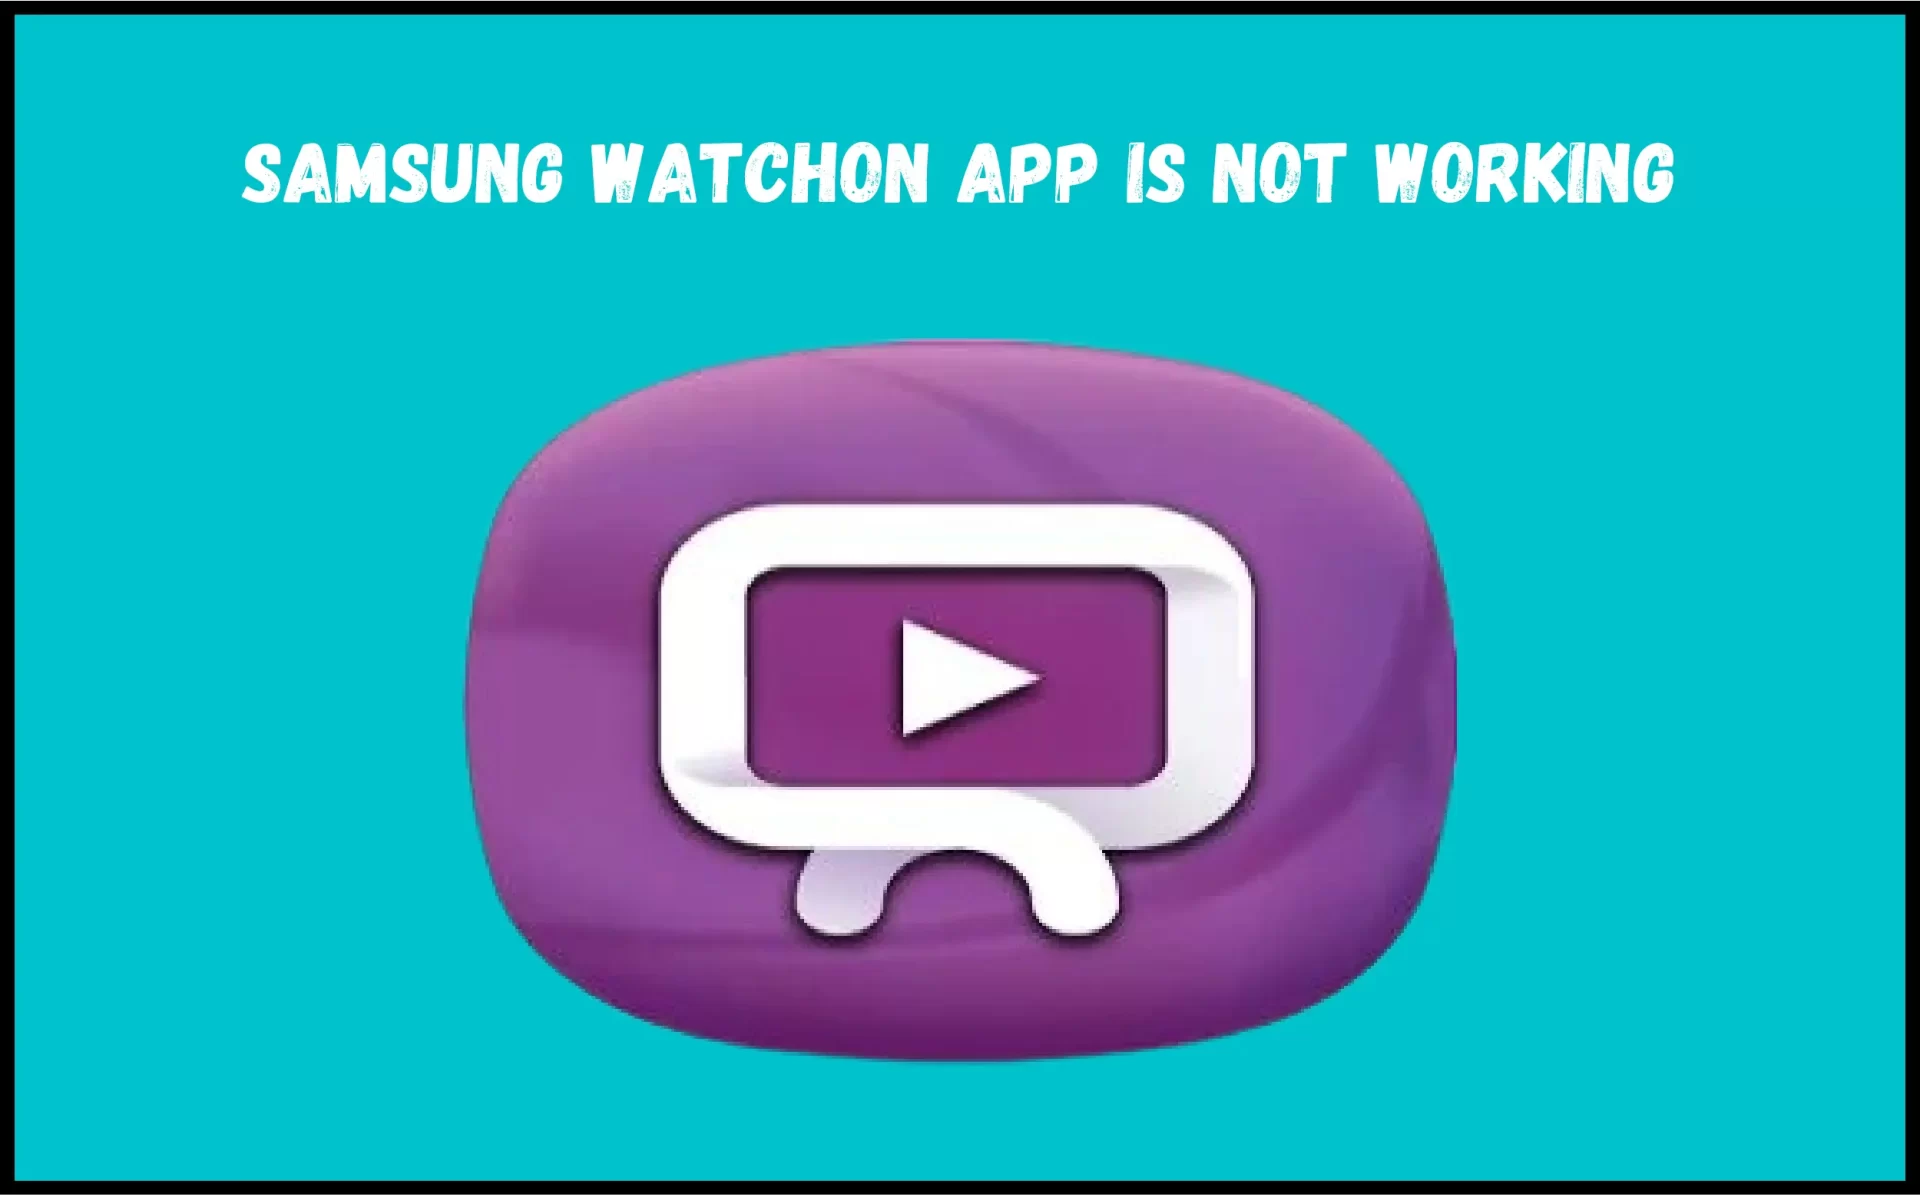 Samsung Watch On App Is Not Working?